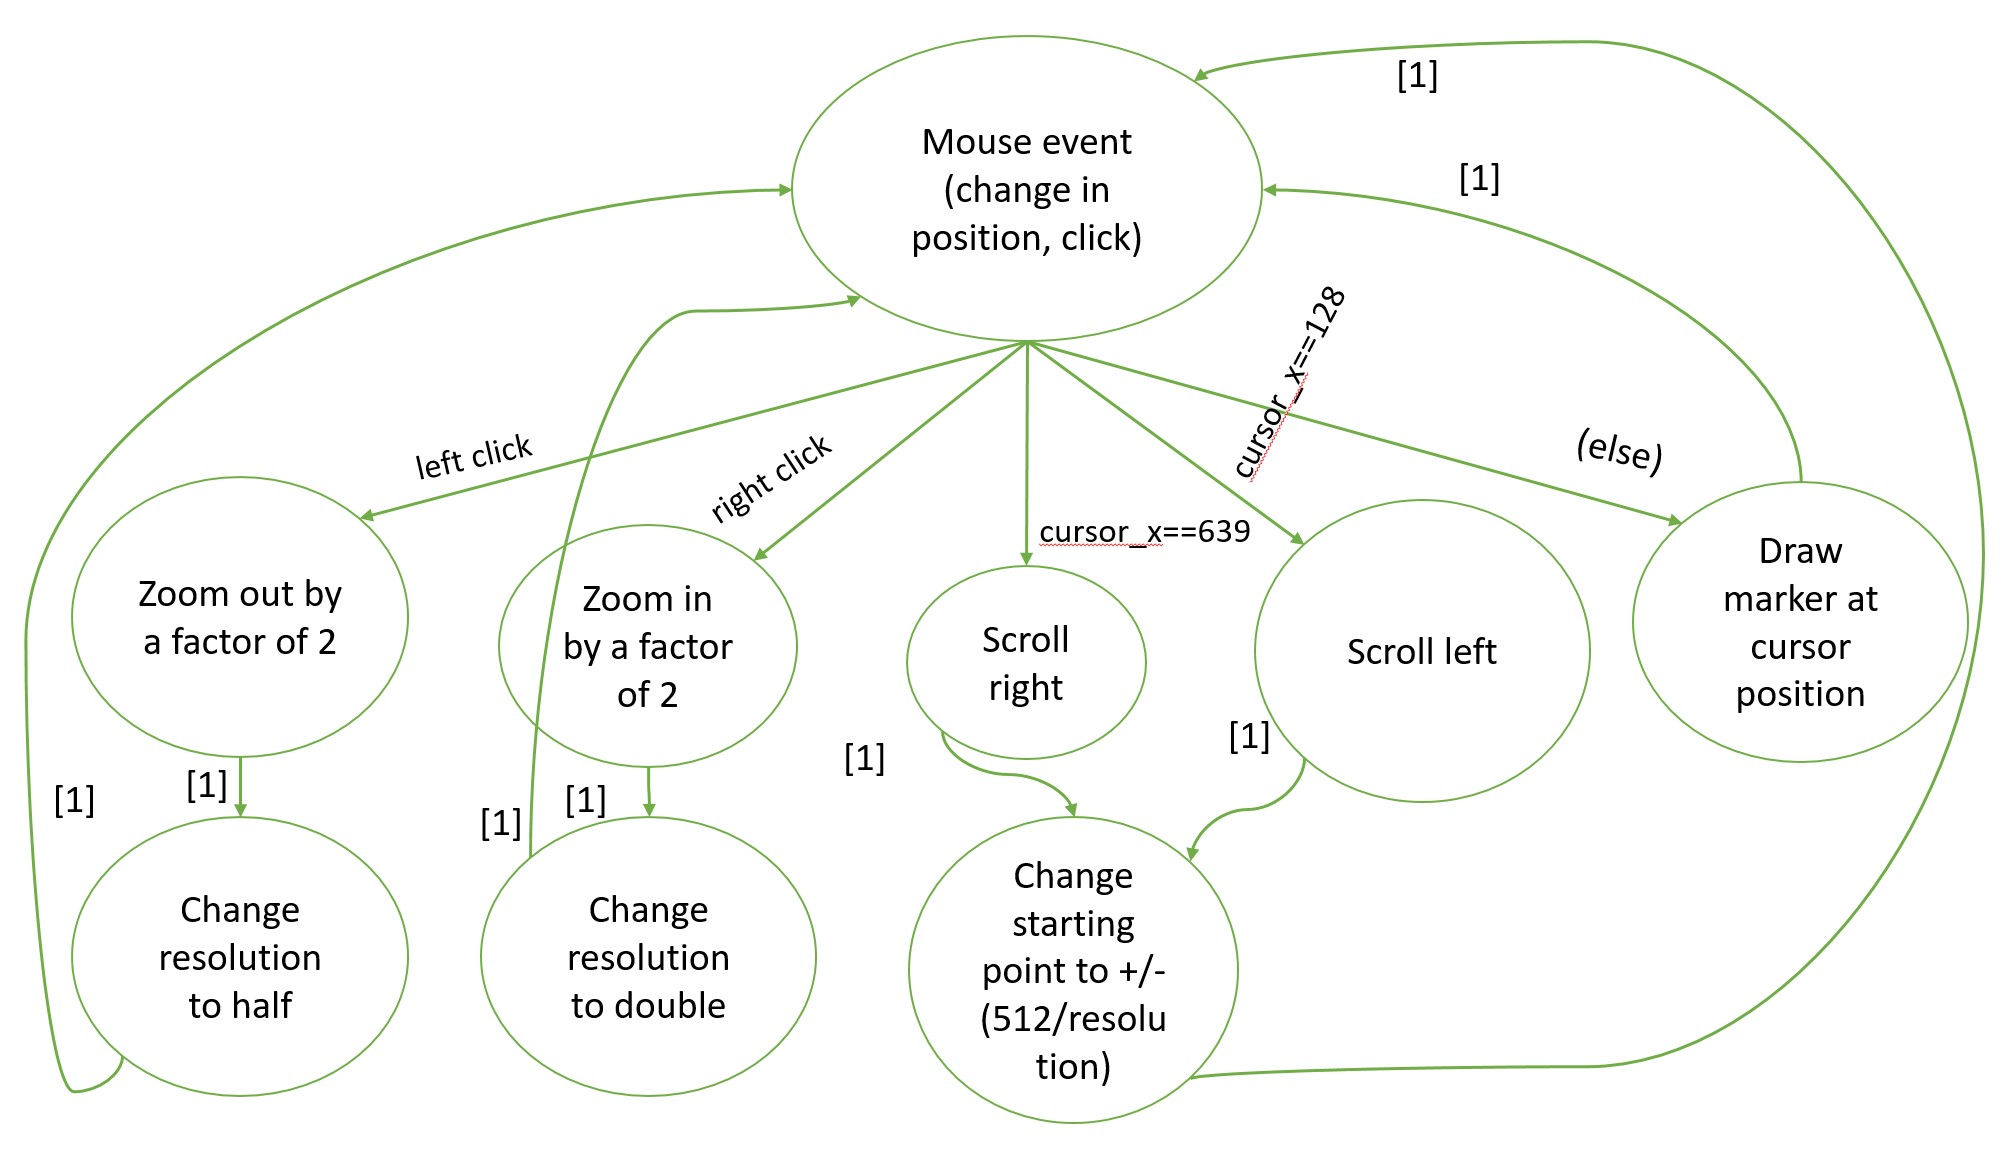 Figure 11 shows dependency of mouse events on state machine